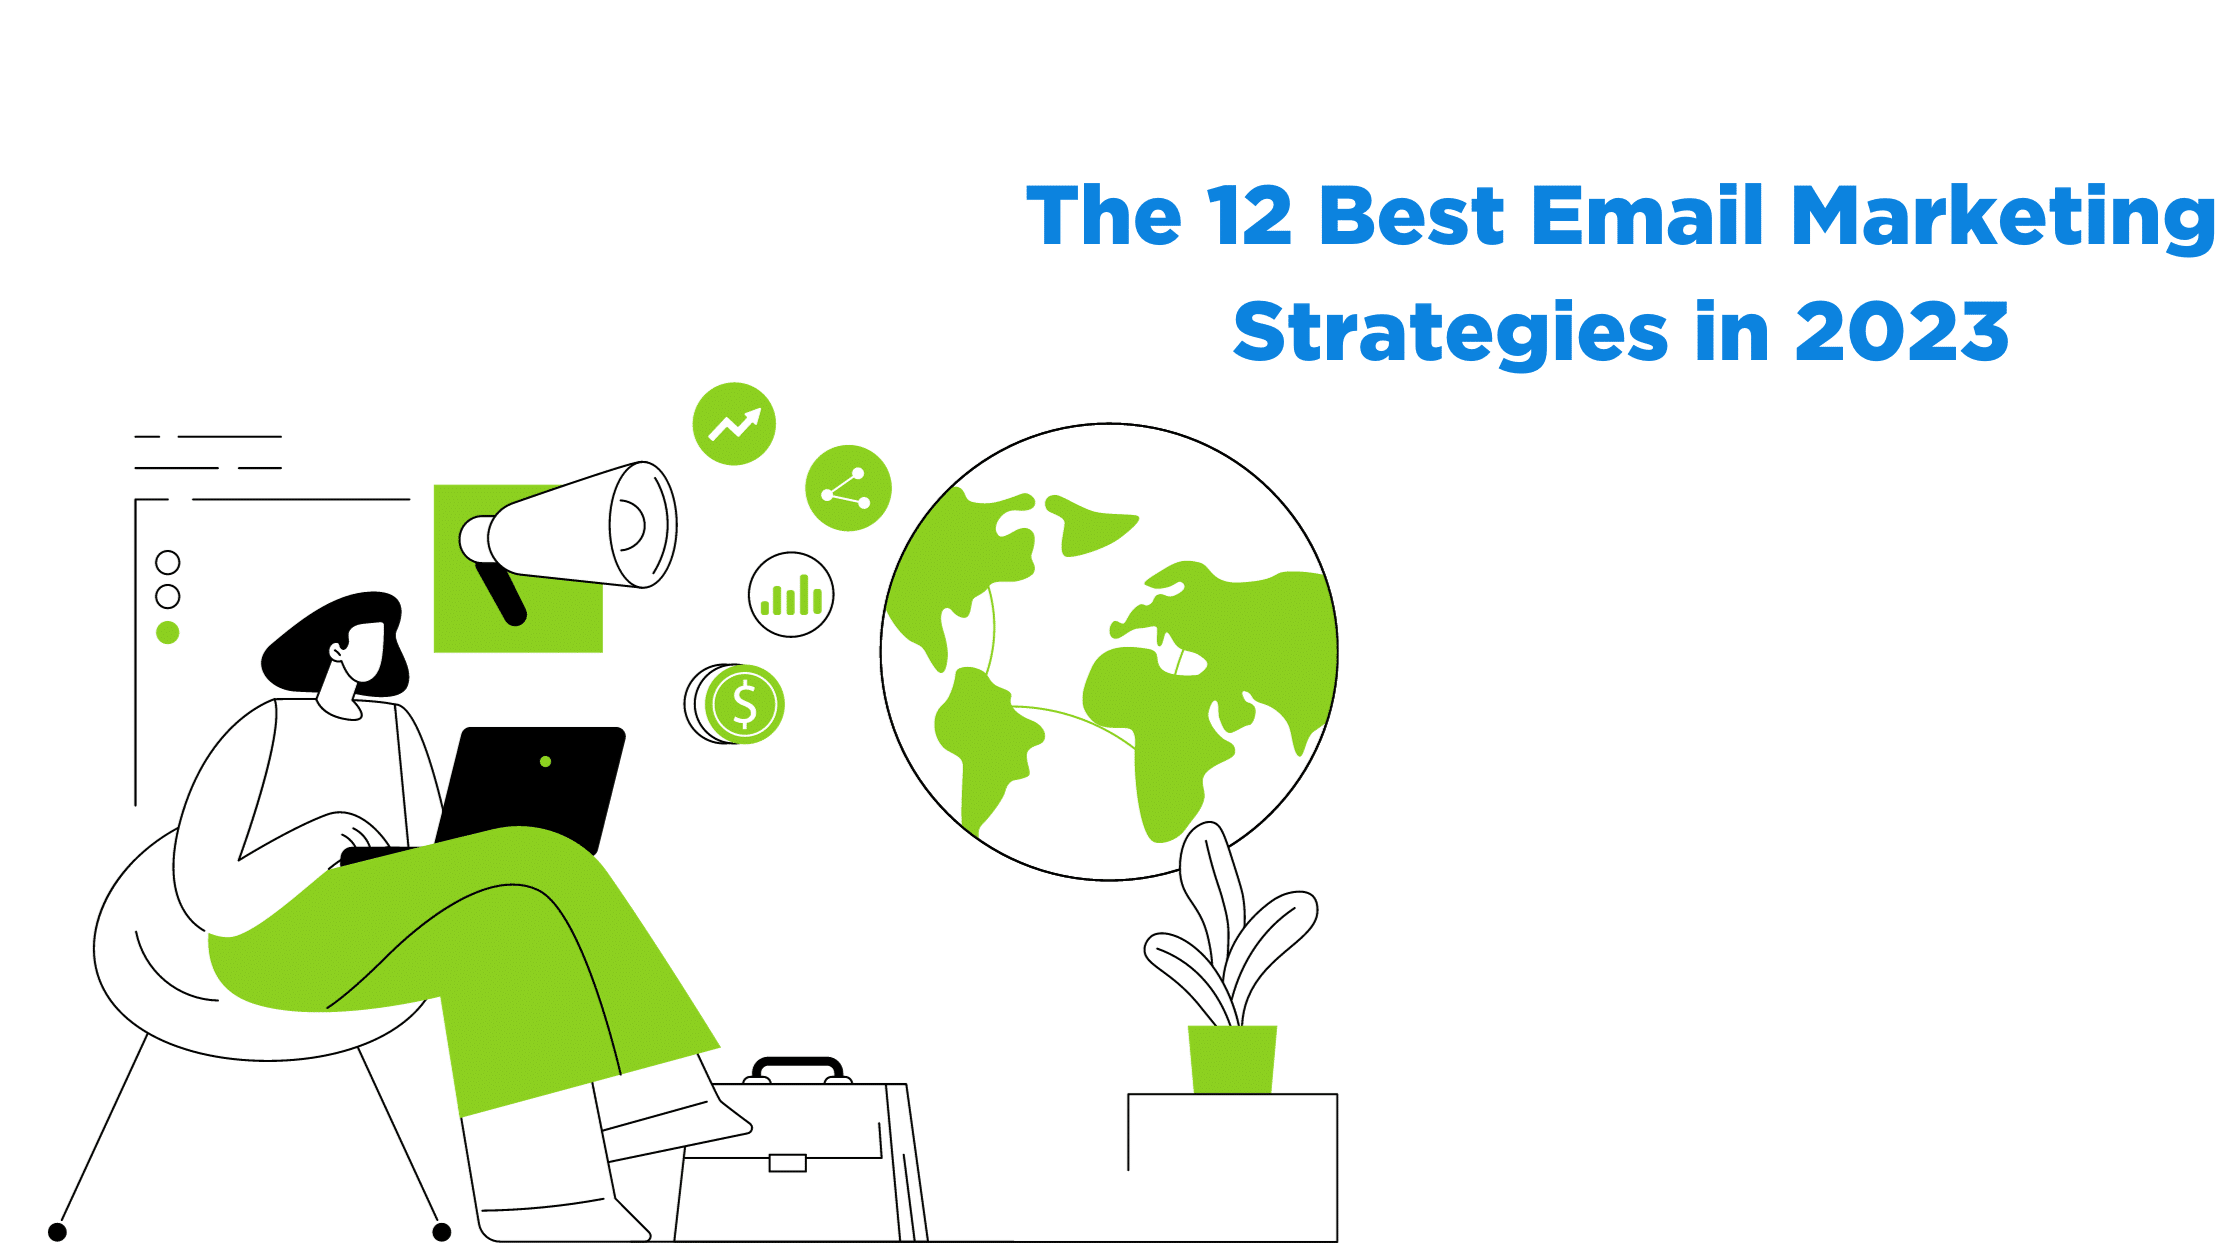 The 12 Best Email Marketing Strategies in 2023